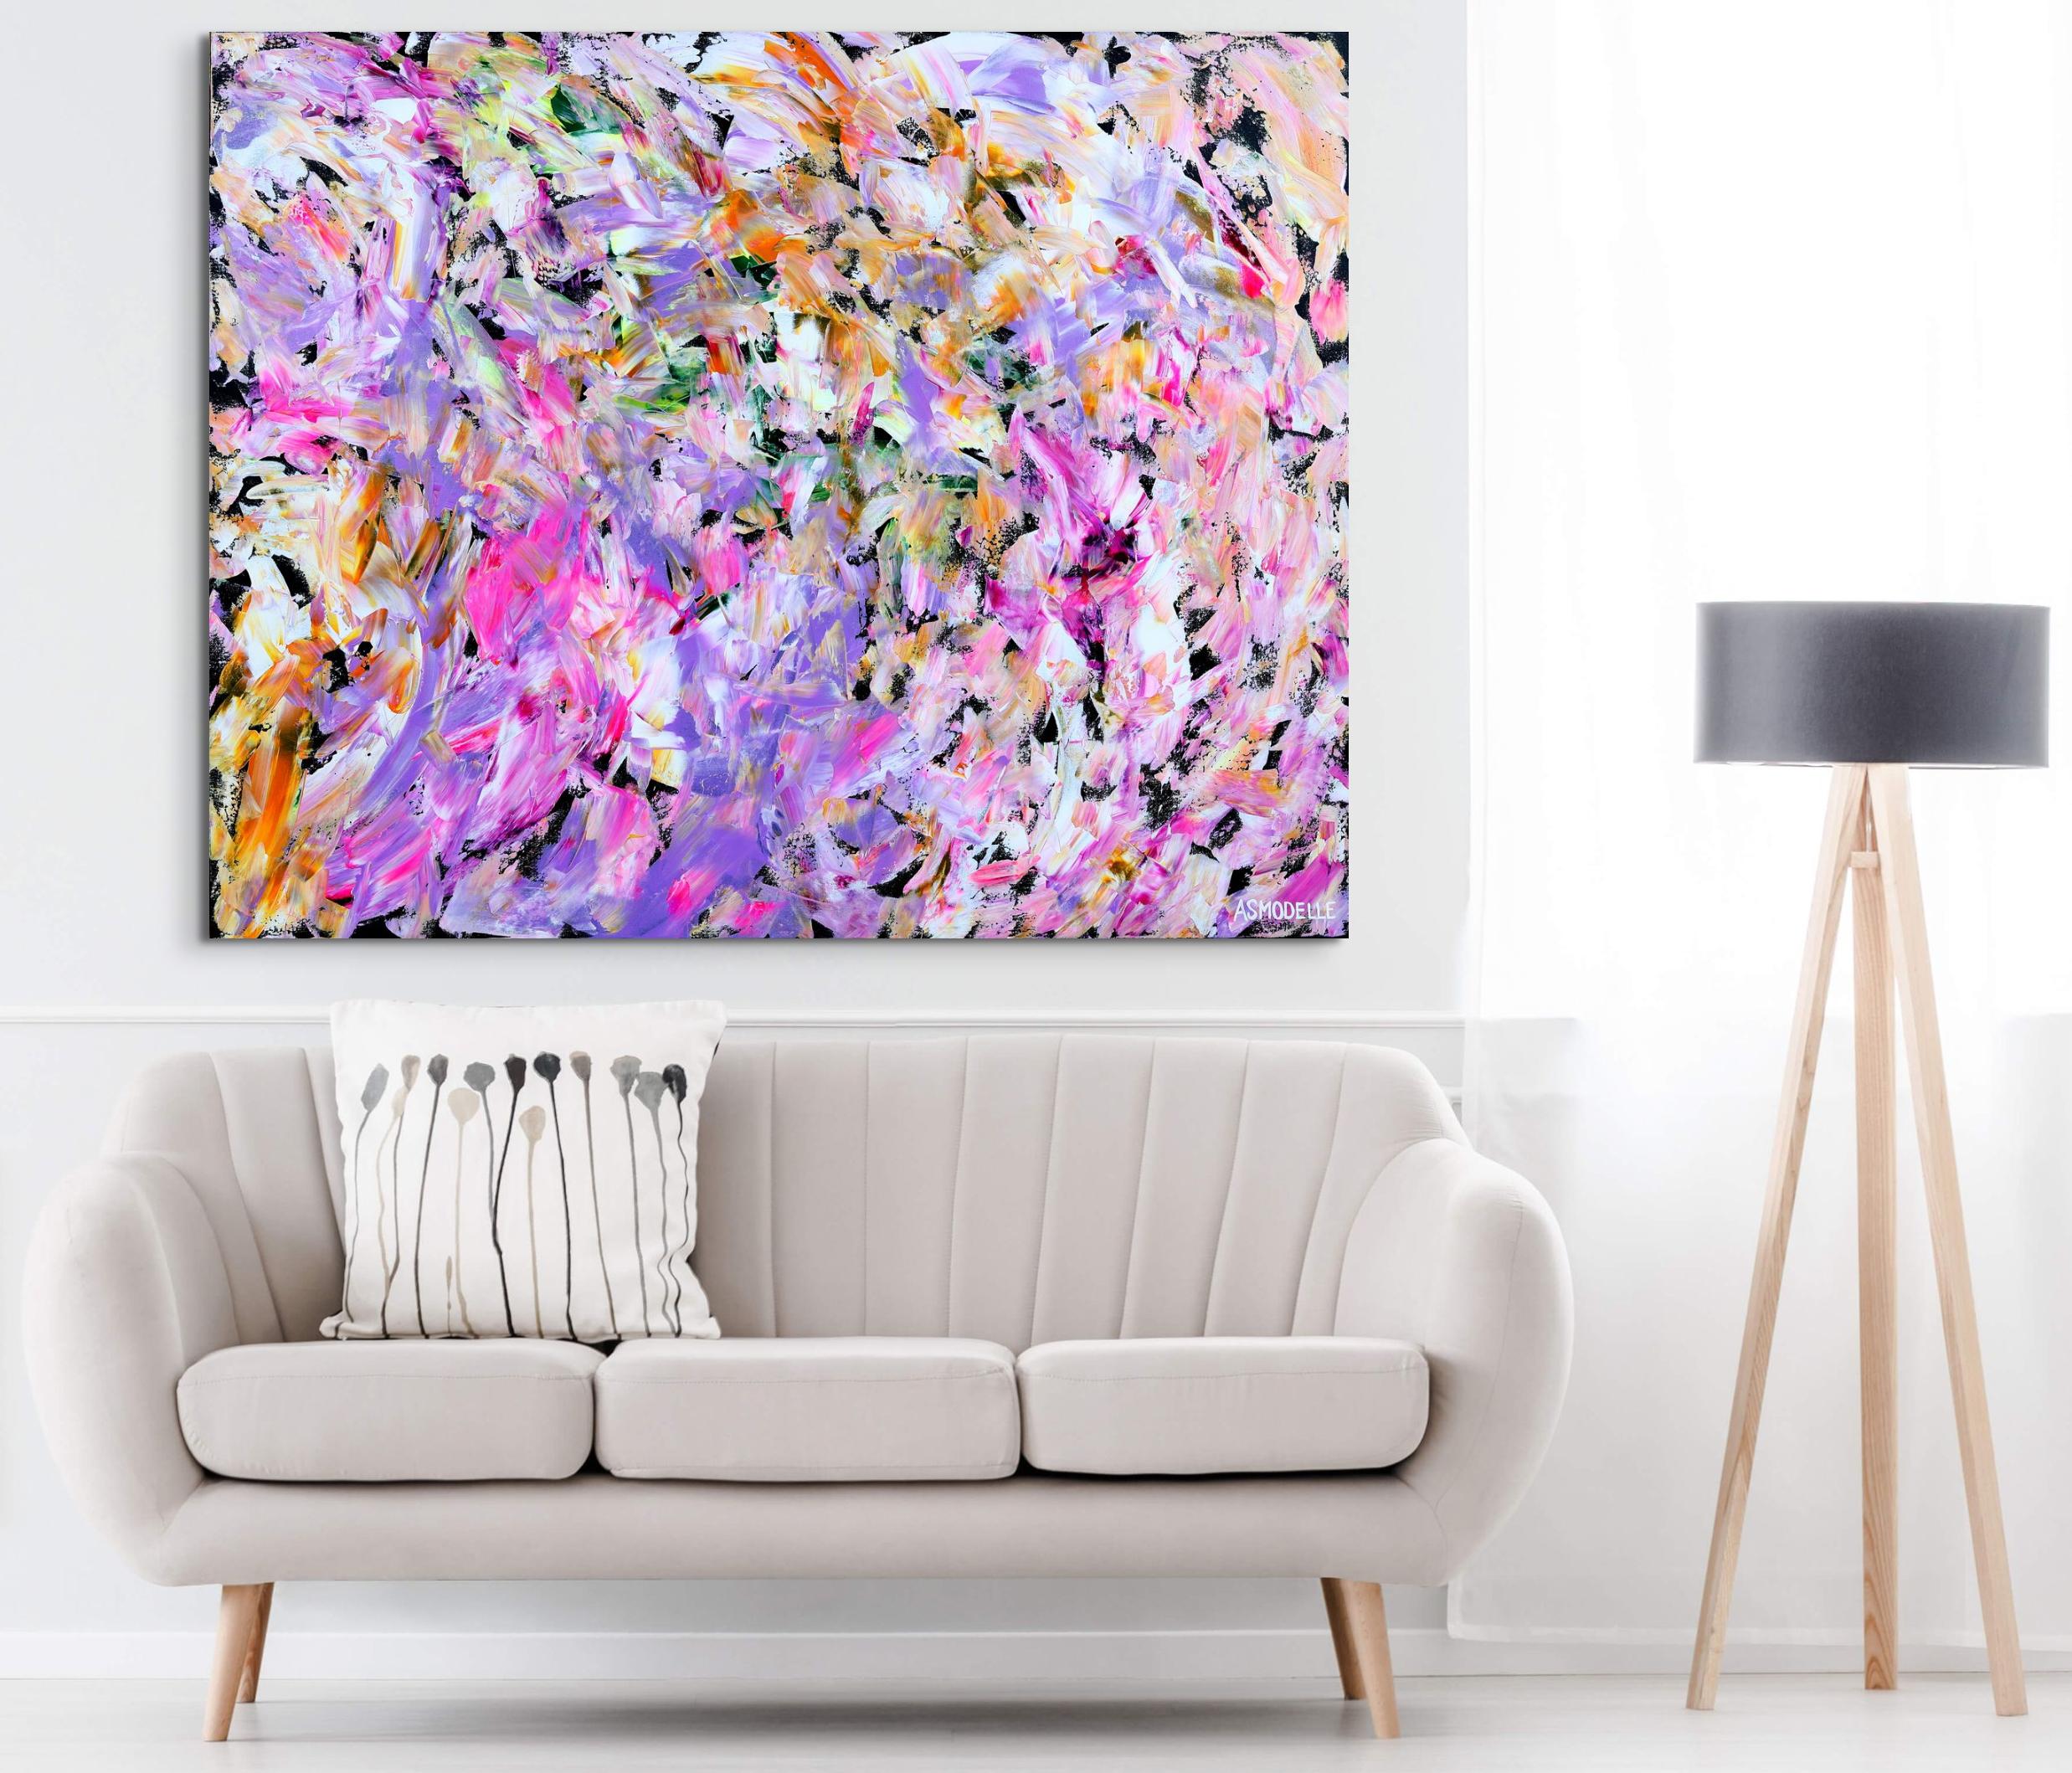 This artwork is an emotional exploration of a floral arrangement, with colours blending into each other like shinny pearls. The work is in the style of abstract expressionism.

This artwork is painted on professional-grade canvas stretched and